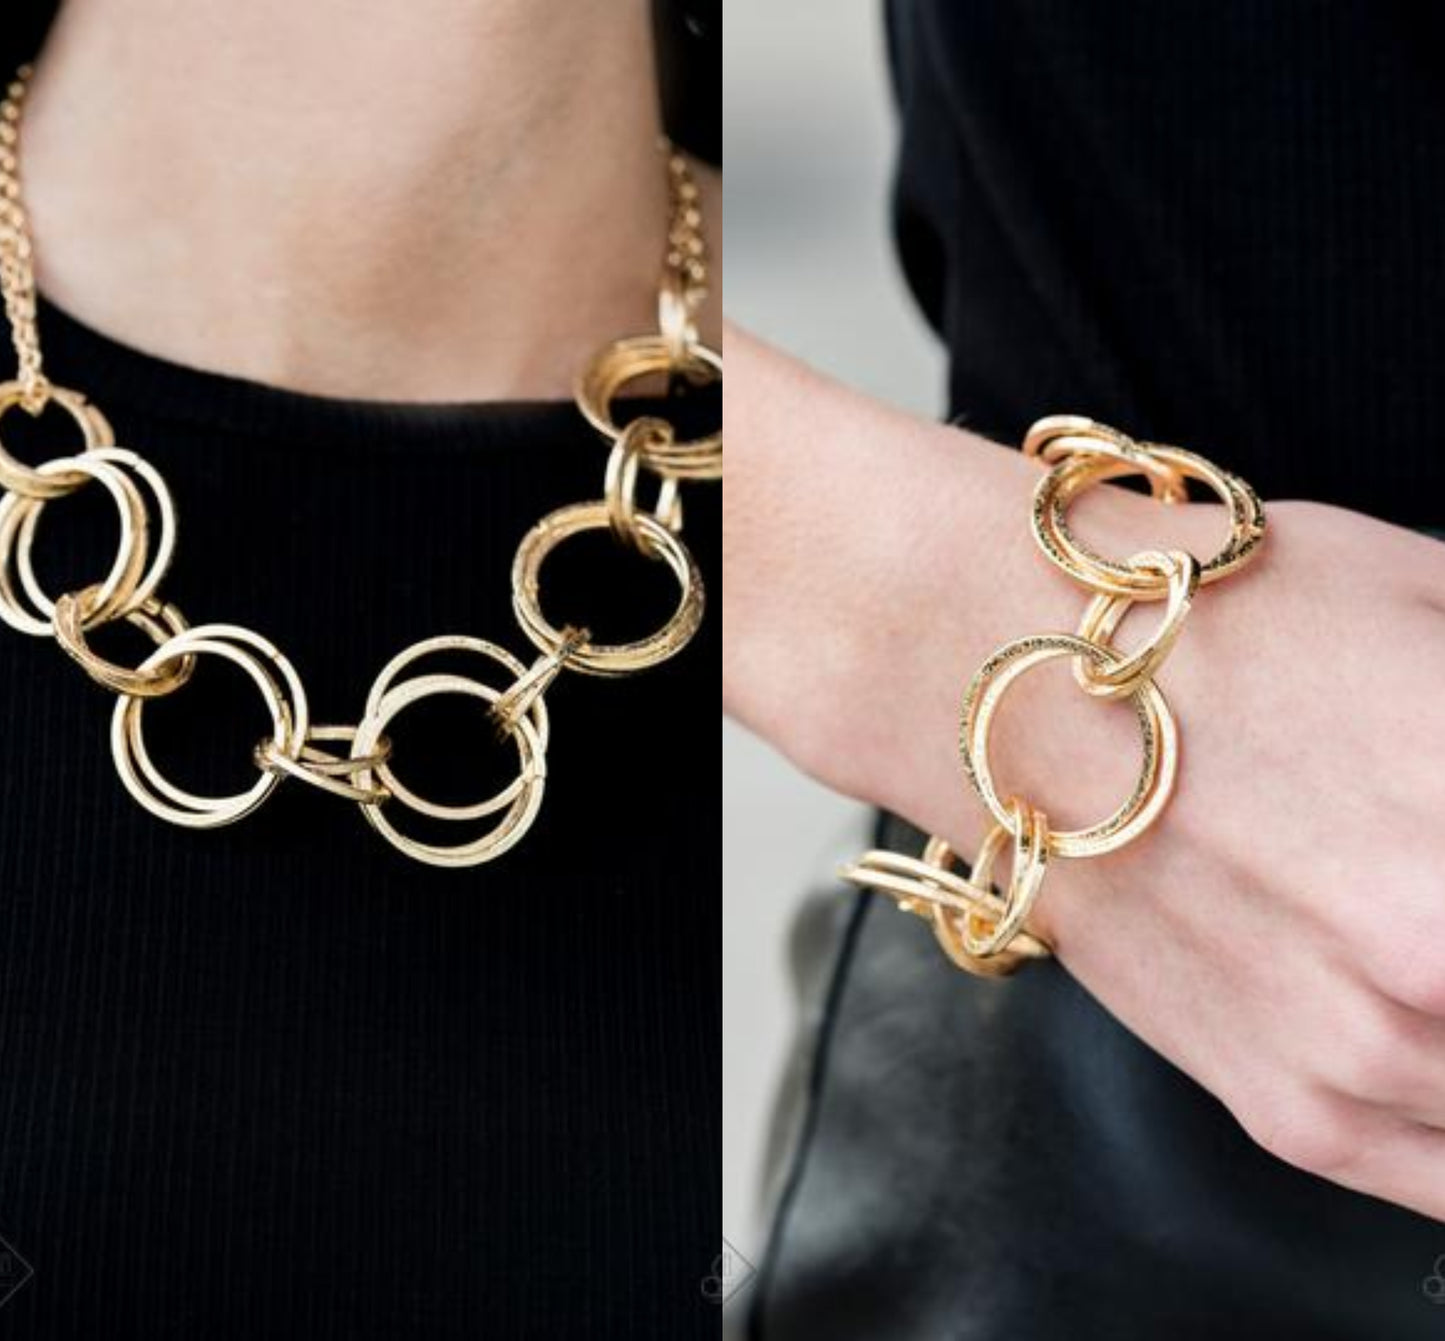 Jump Into The Ring - Gold necklace w/ matching bracelet